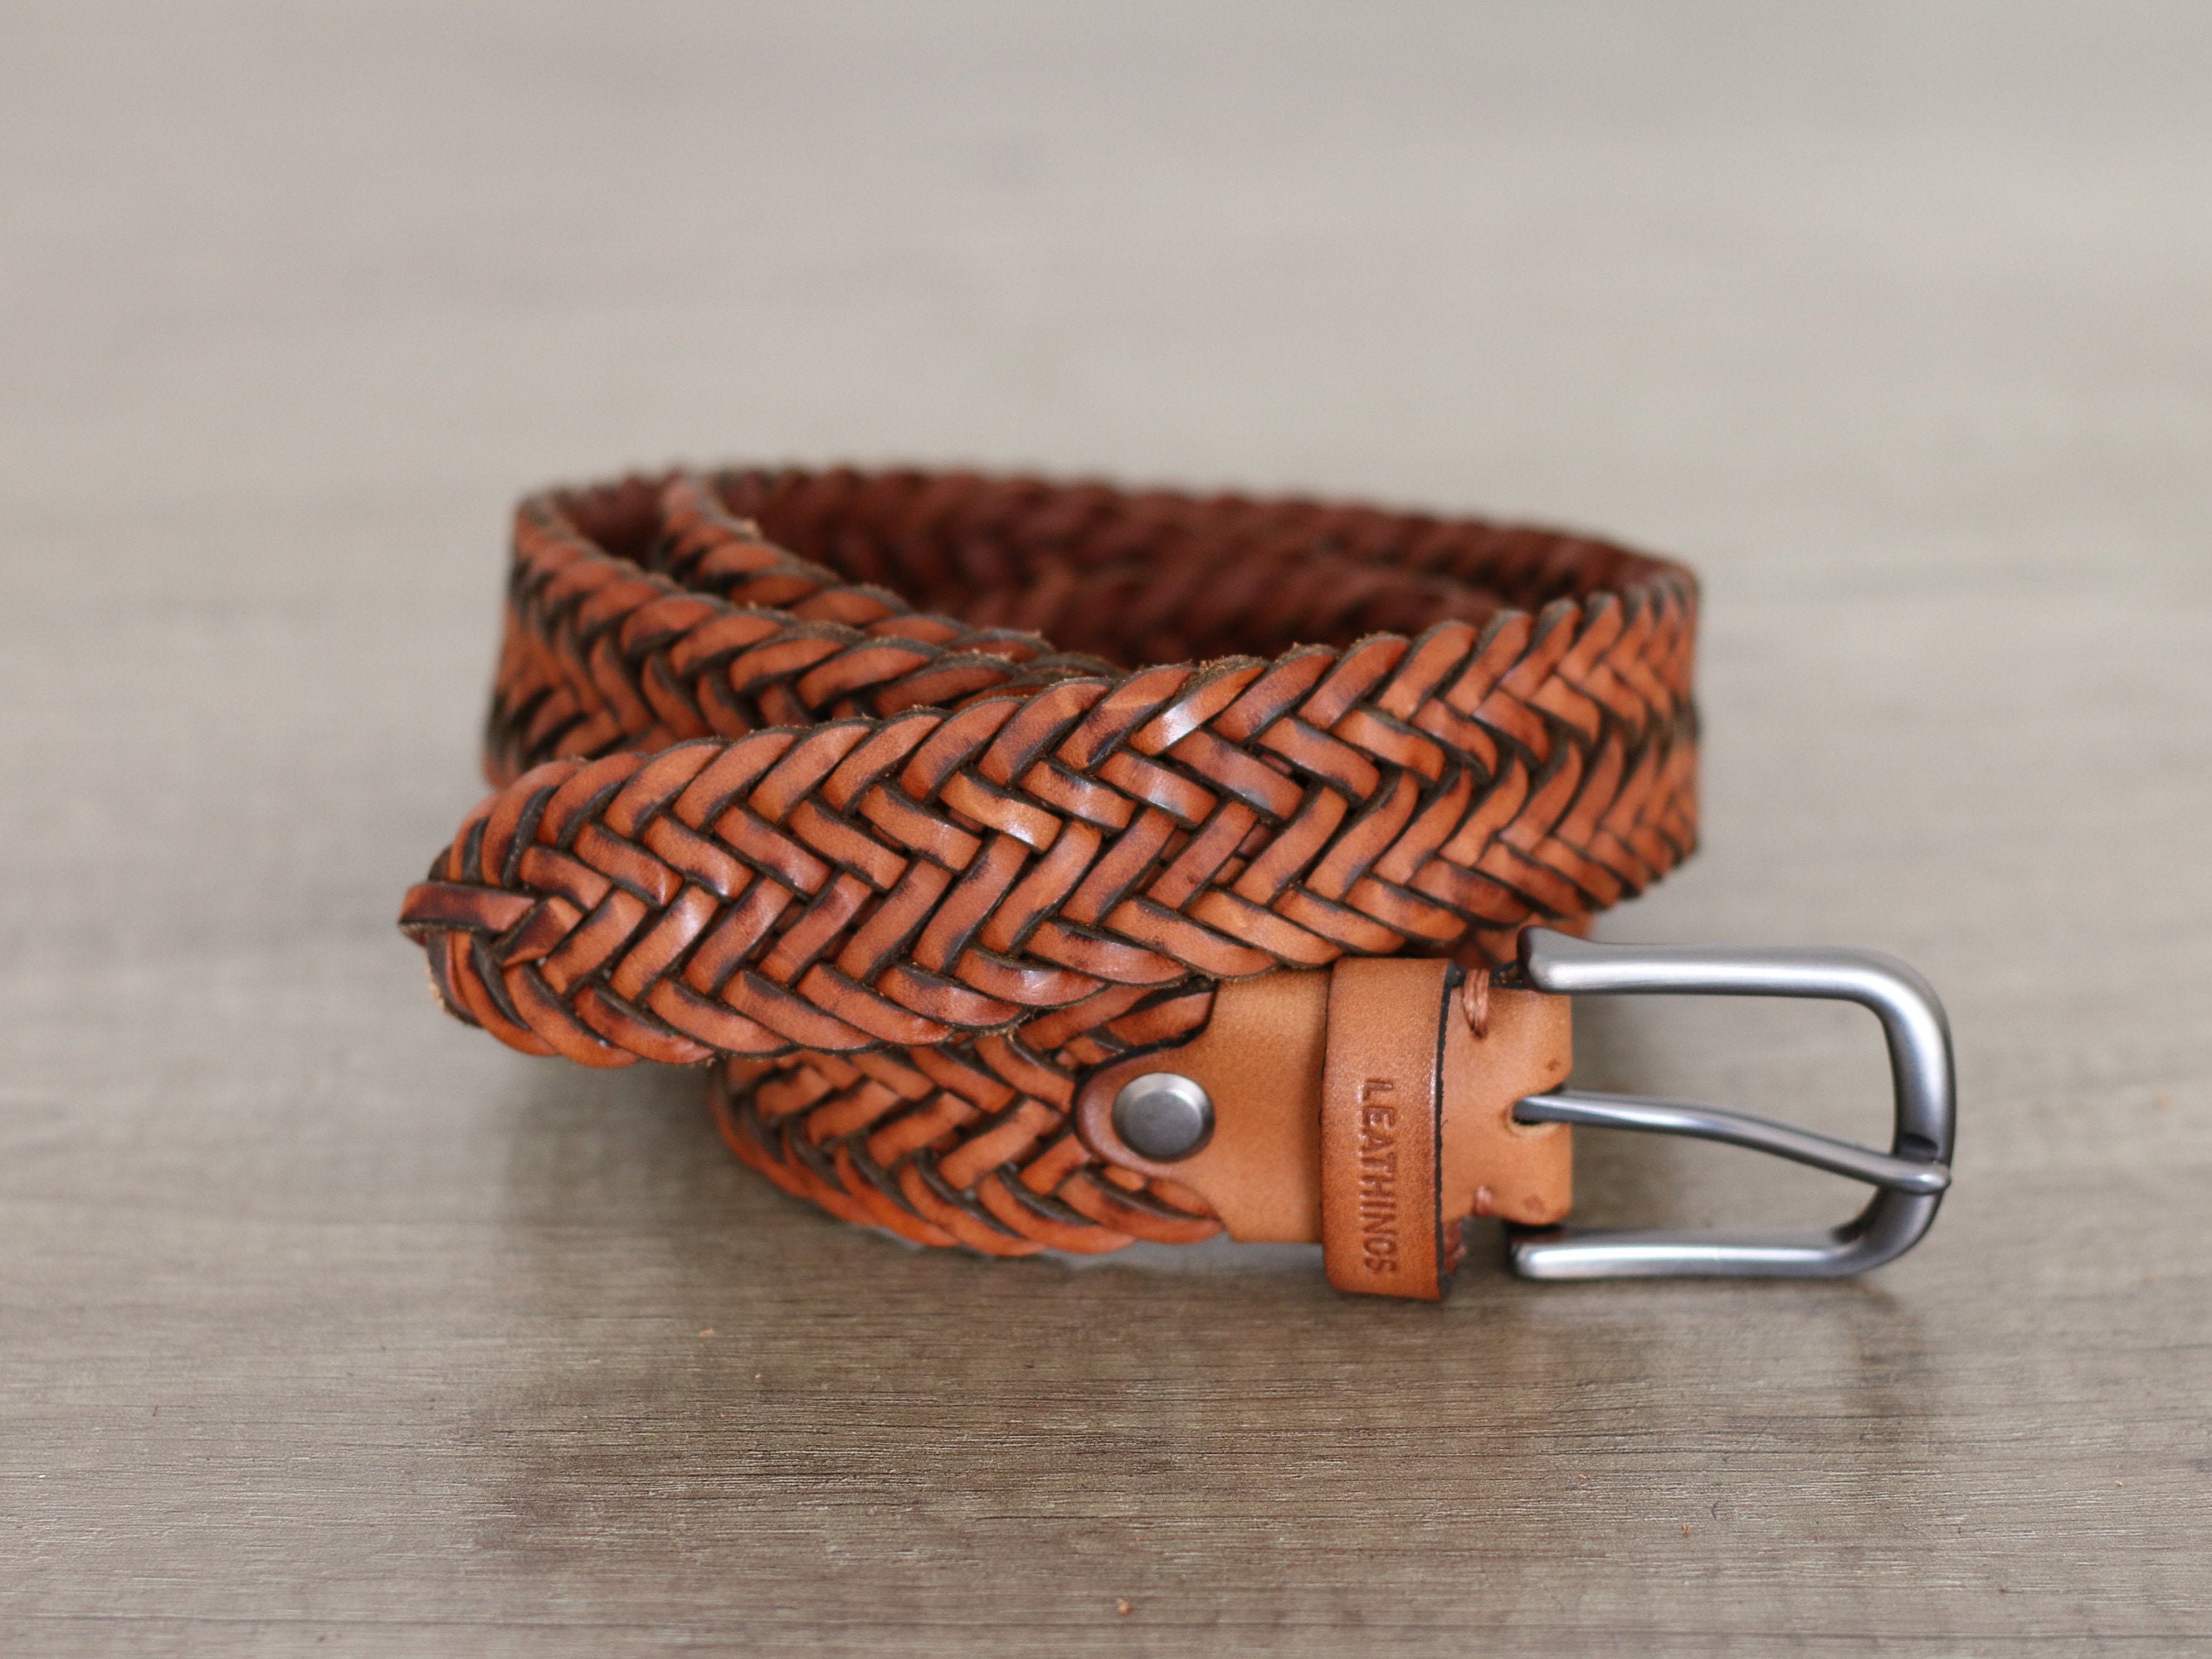 Buy Braided Tan Leather Belt Handcrafted Vegetabled Leather Belts